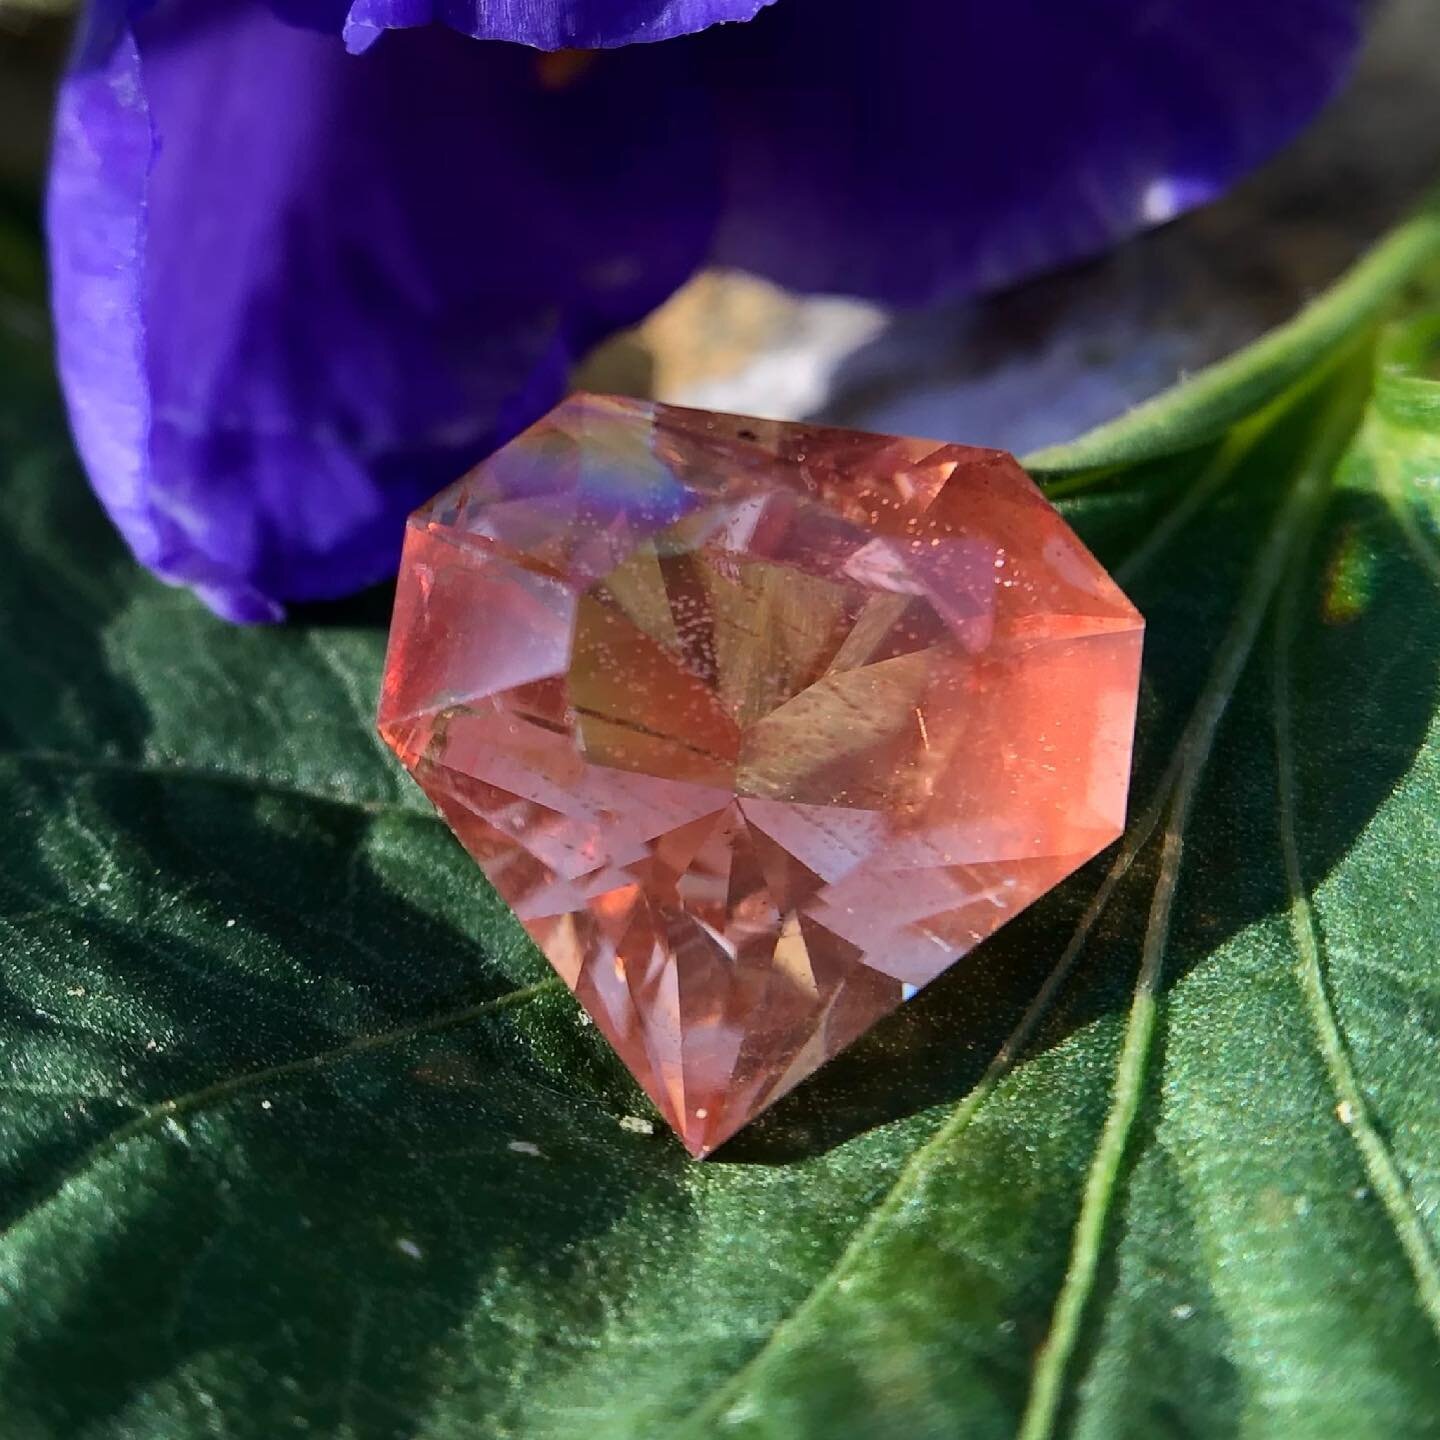 3.5ct Oregon sunstone by me, @steadygems! Available for custom design. 💖 
This gem is packed full of sparkling schiller. Check the videos over at @steadygems to see this beauty in action. 
Message to claim.